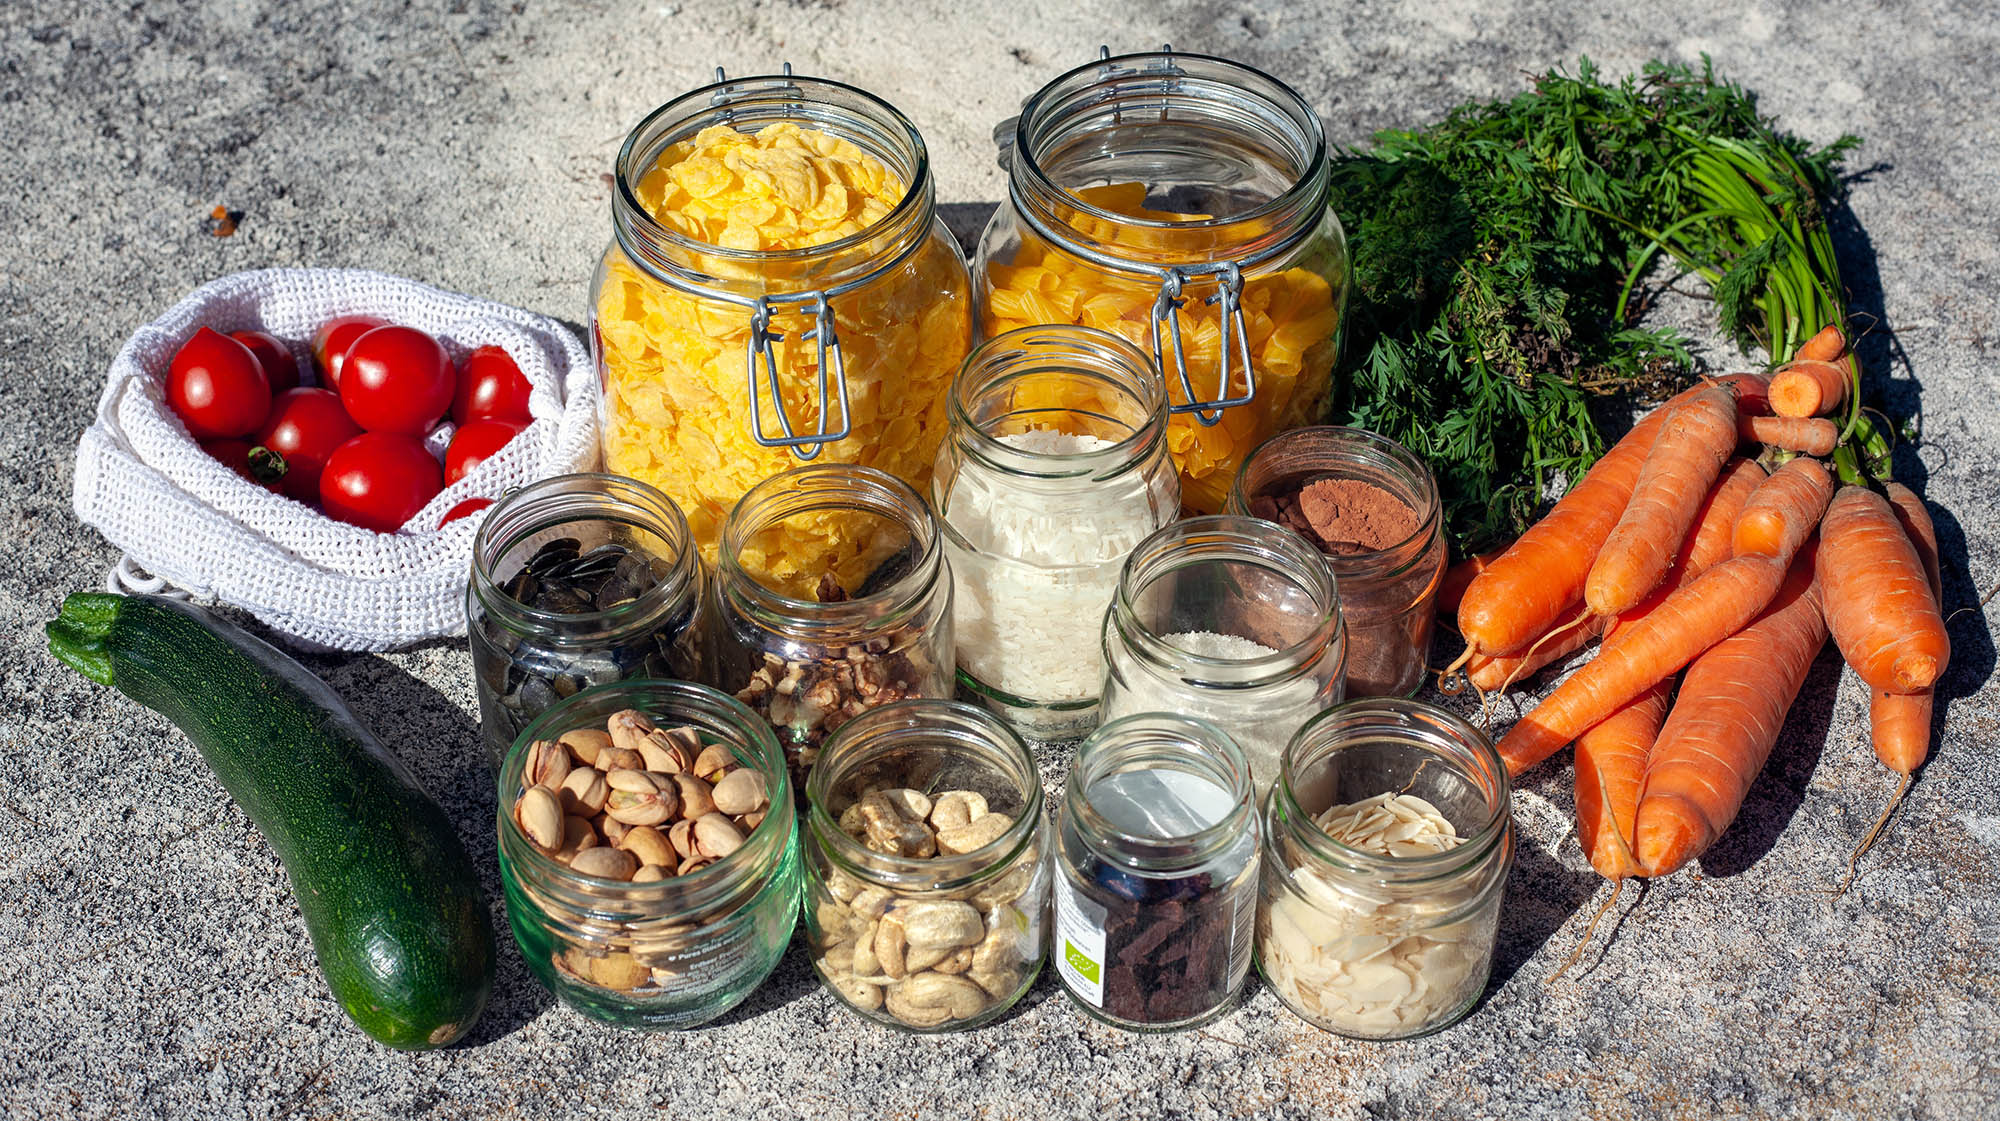 Variety of groceries in glass jars and reusable bags